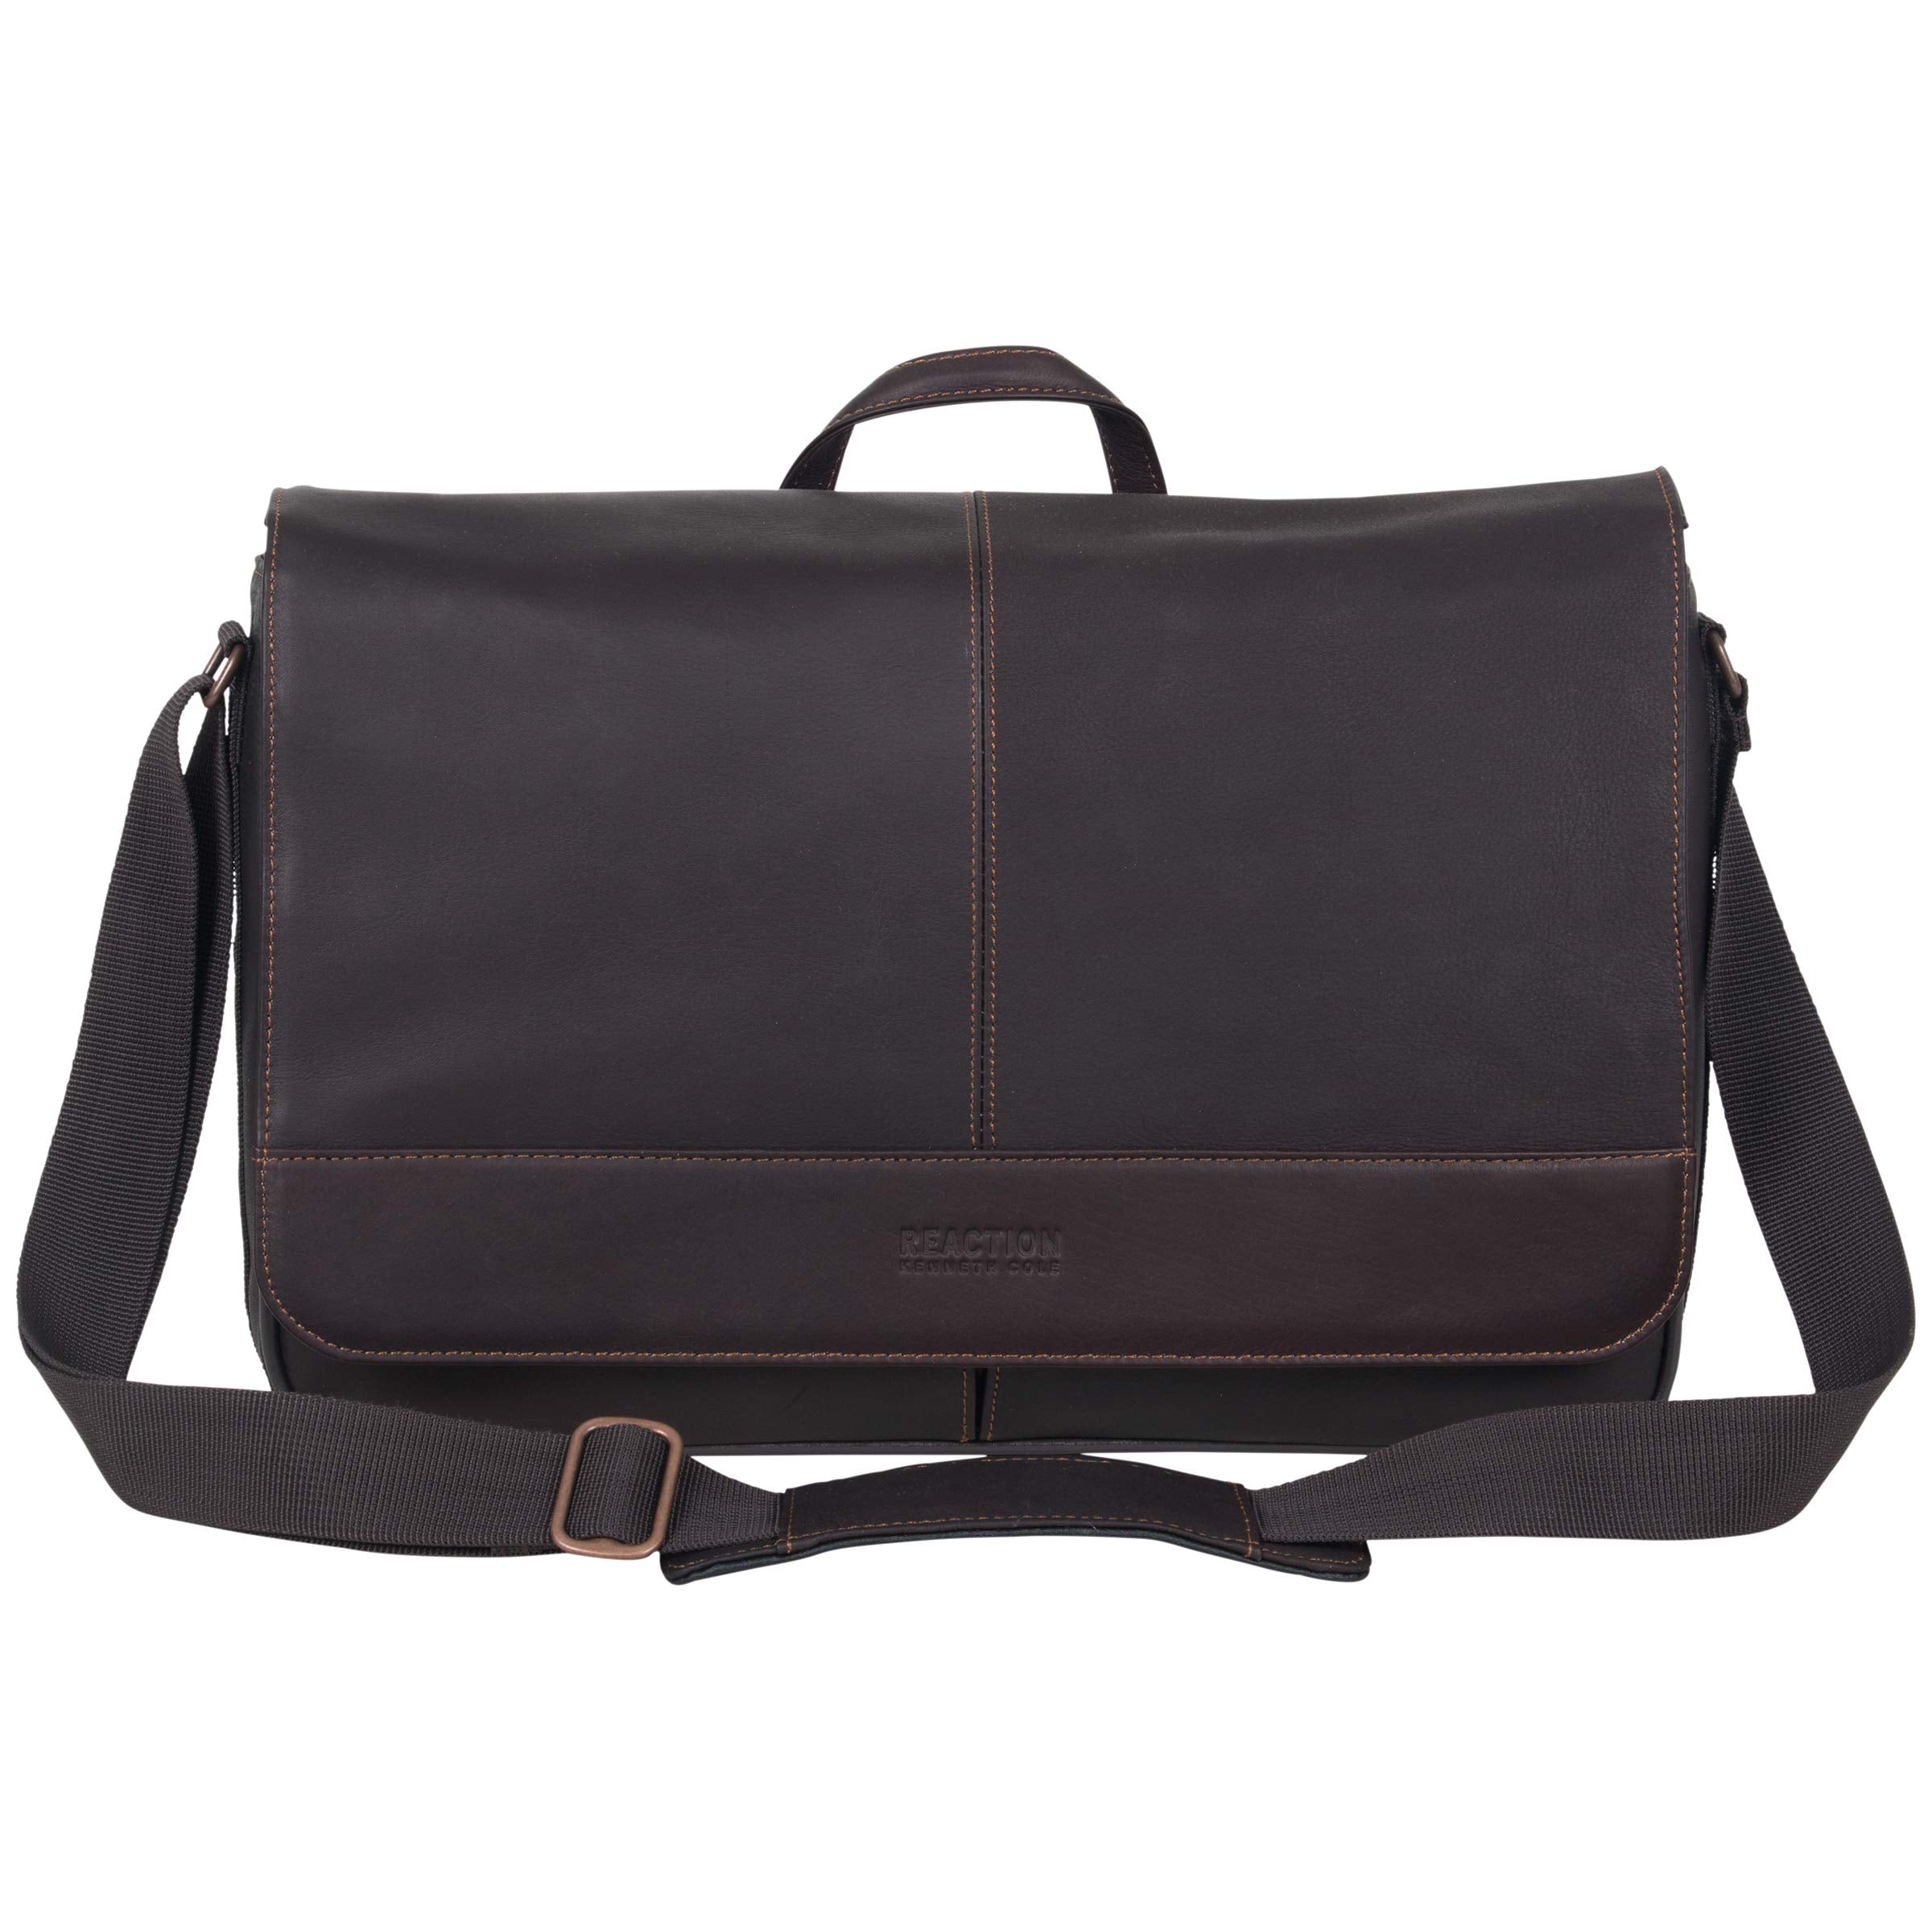 Kenneth Cole Reaction Come Bag Soon - Colombian Leather Laptop & iPad Messenger, Brown (7763051348206)